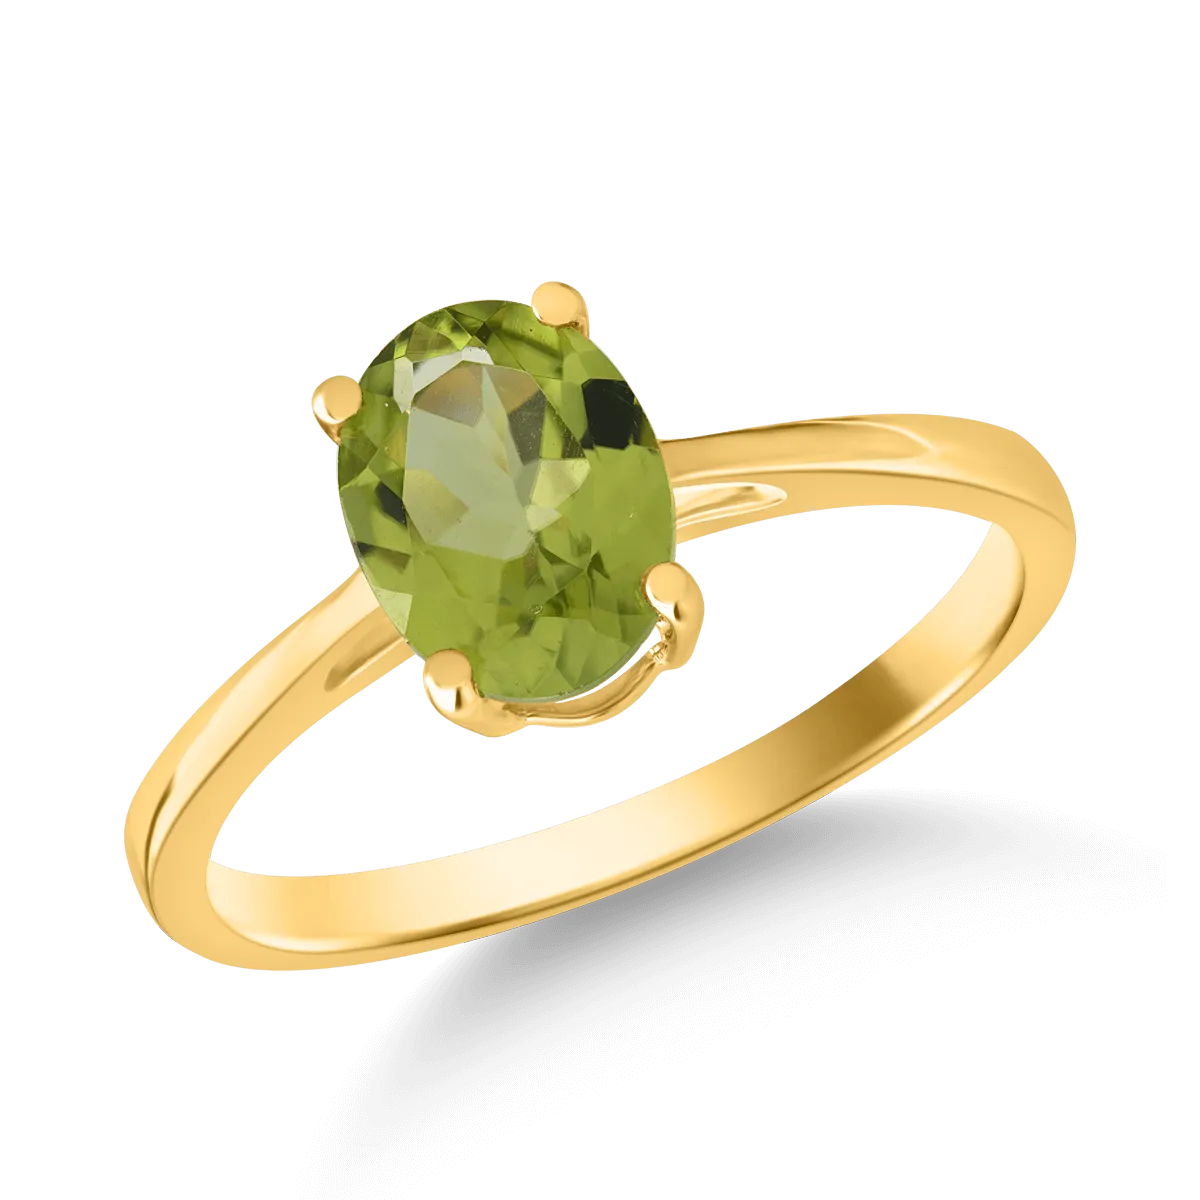 14K yellow gold ring with 1.2ct peridot